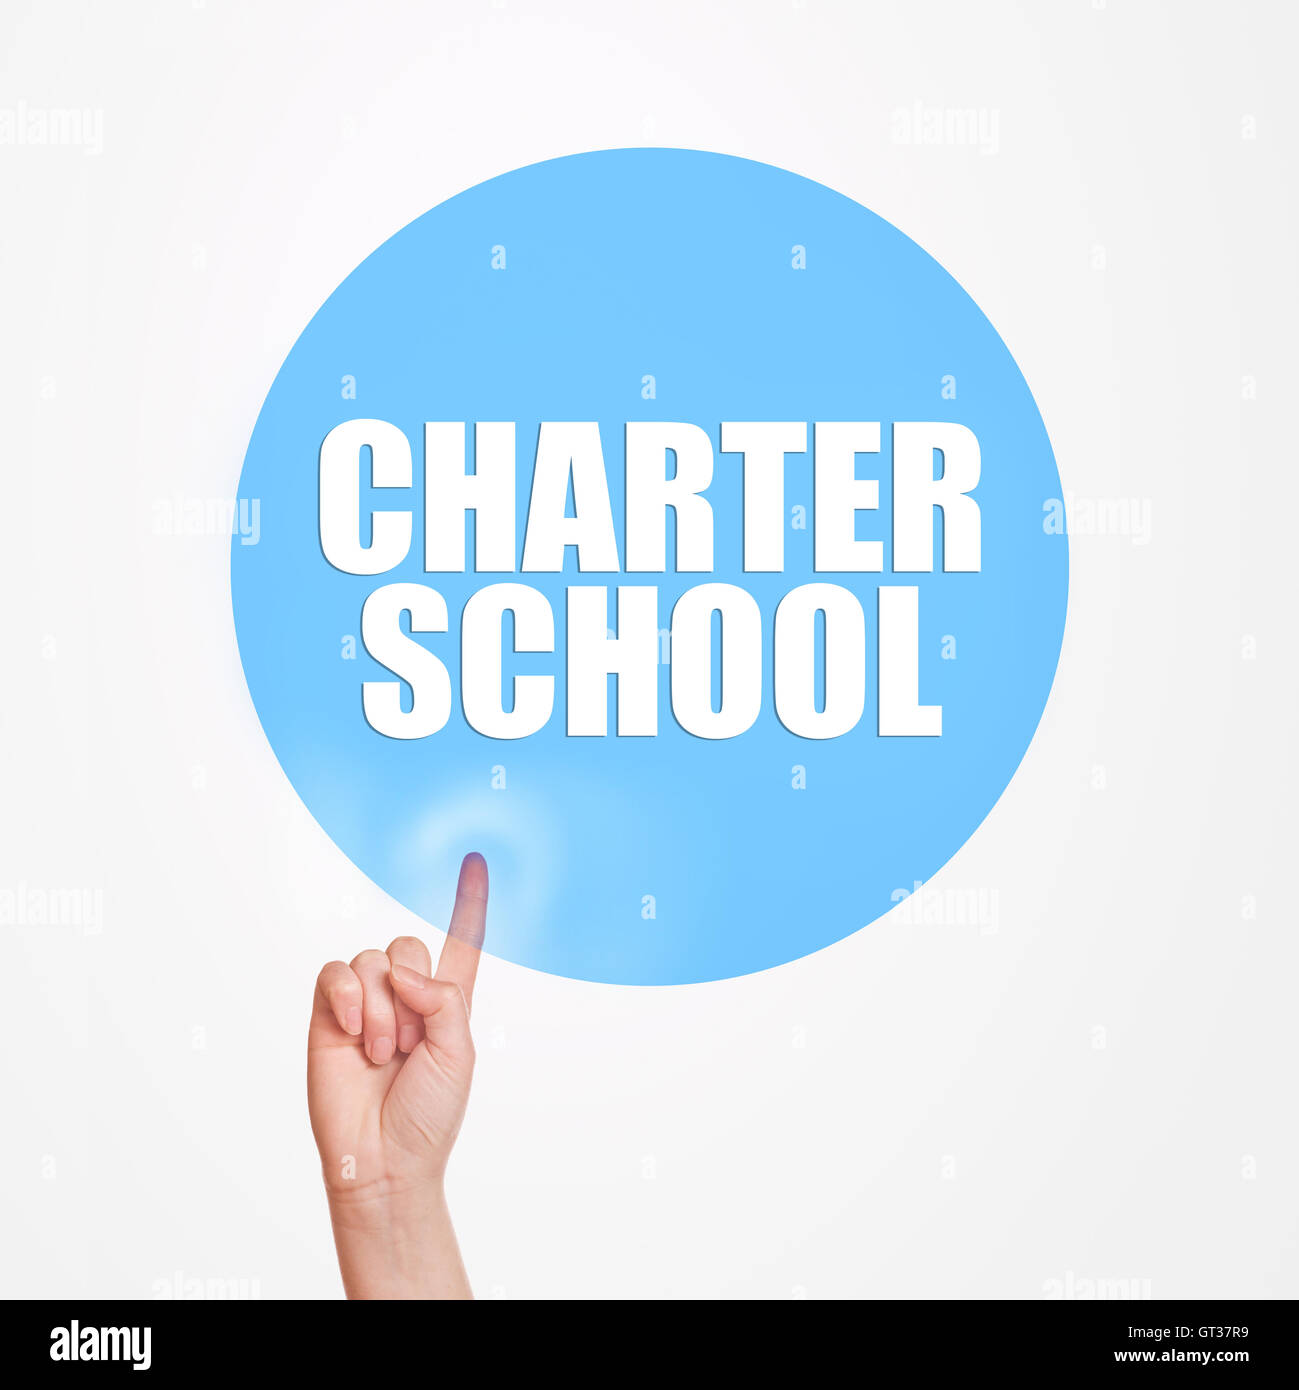 Charter school concept, hand pushing virtual button of internet page to get informed about studies. Stock Photo